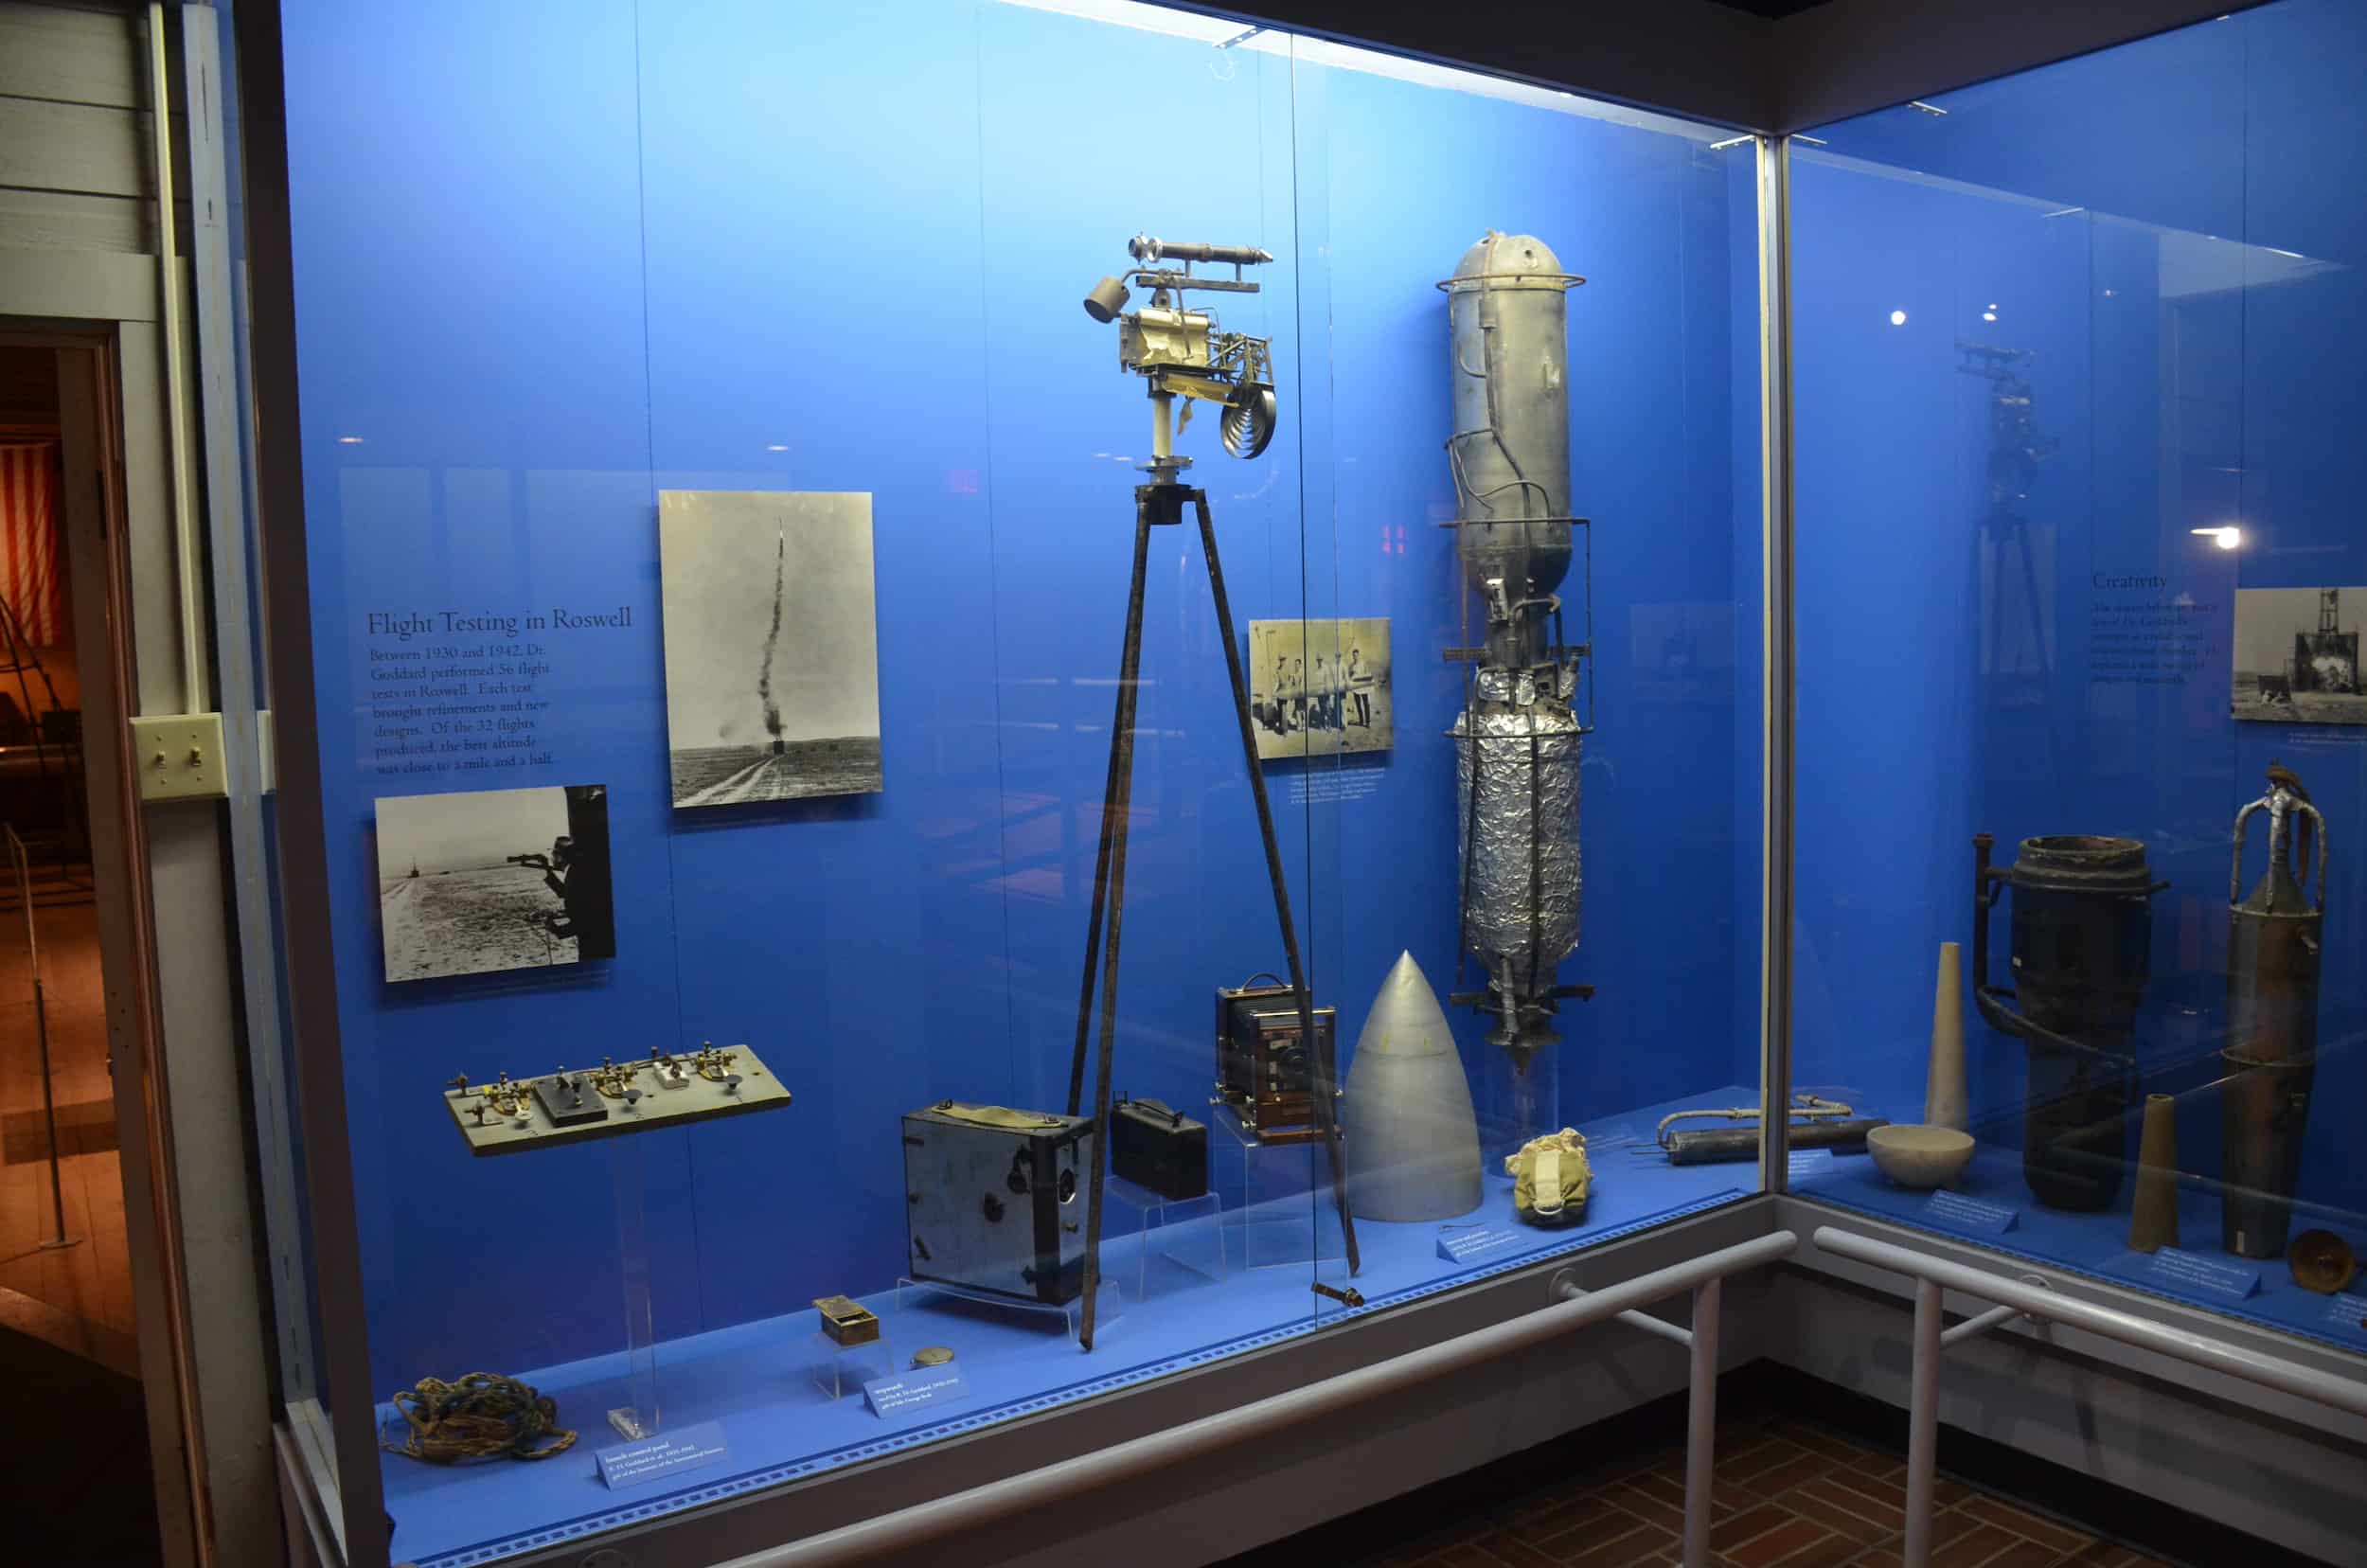 Artifacts and photos from Goddard's test flights in Robert H. Goddard: The Father of Modern Rocketry at the Roswell Museum and Arts Center in Roswell, New Mexico